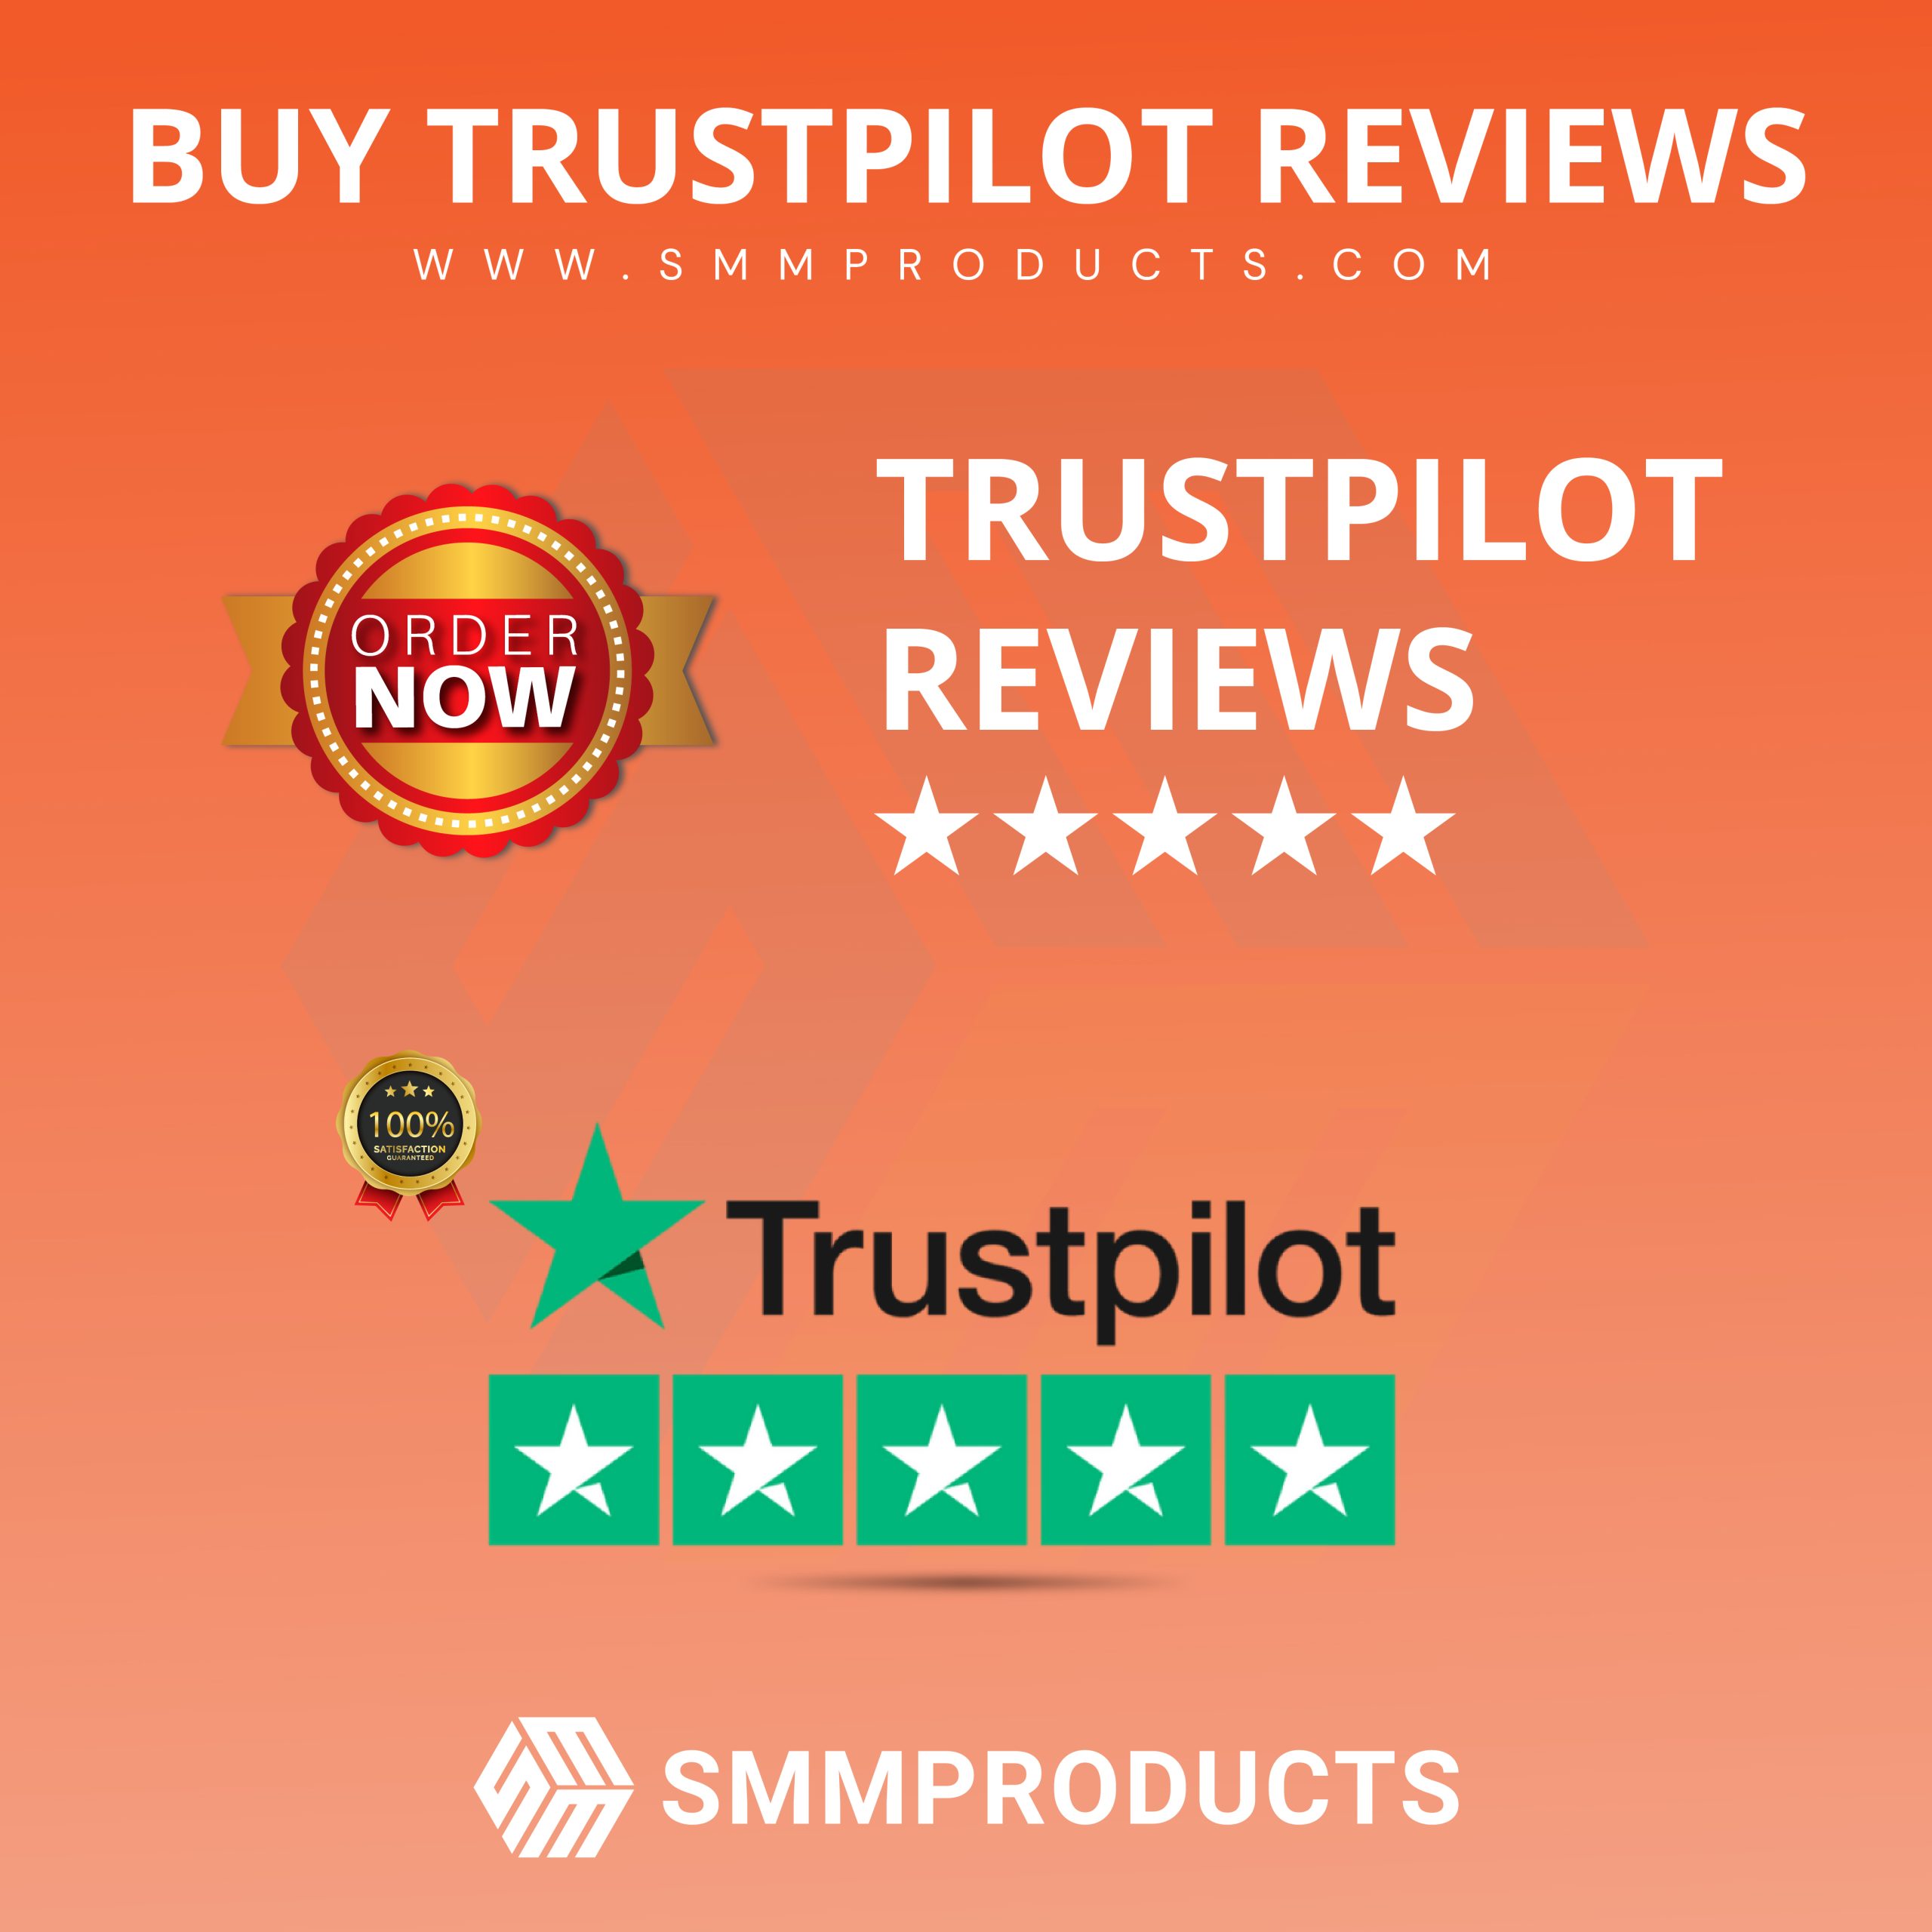 Buy Trustpilot Reviews - SMMProducts